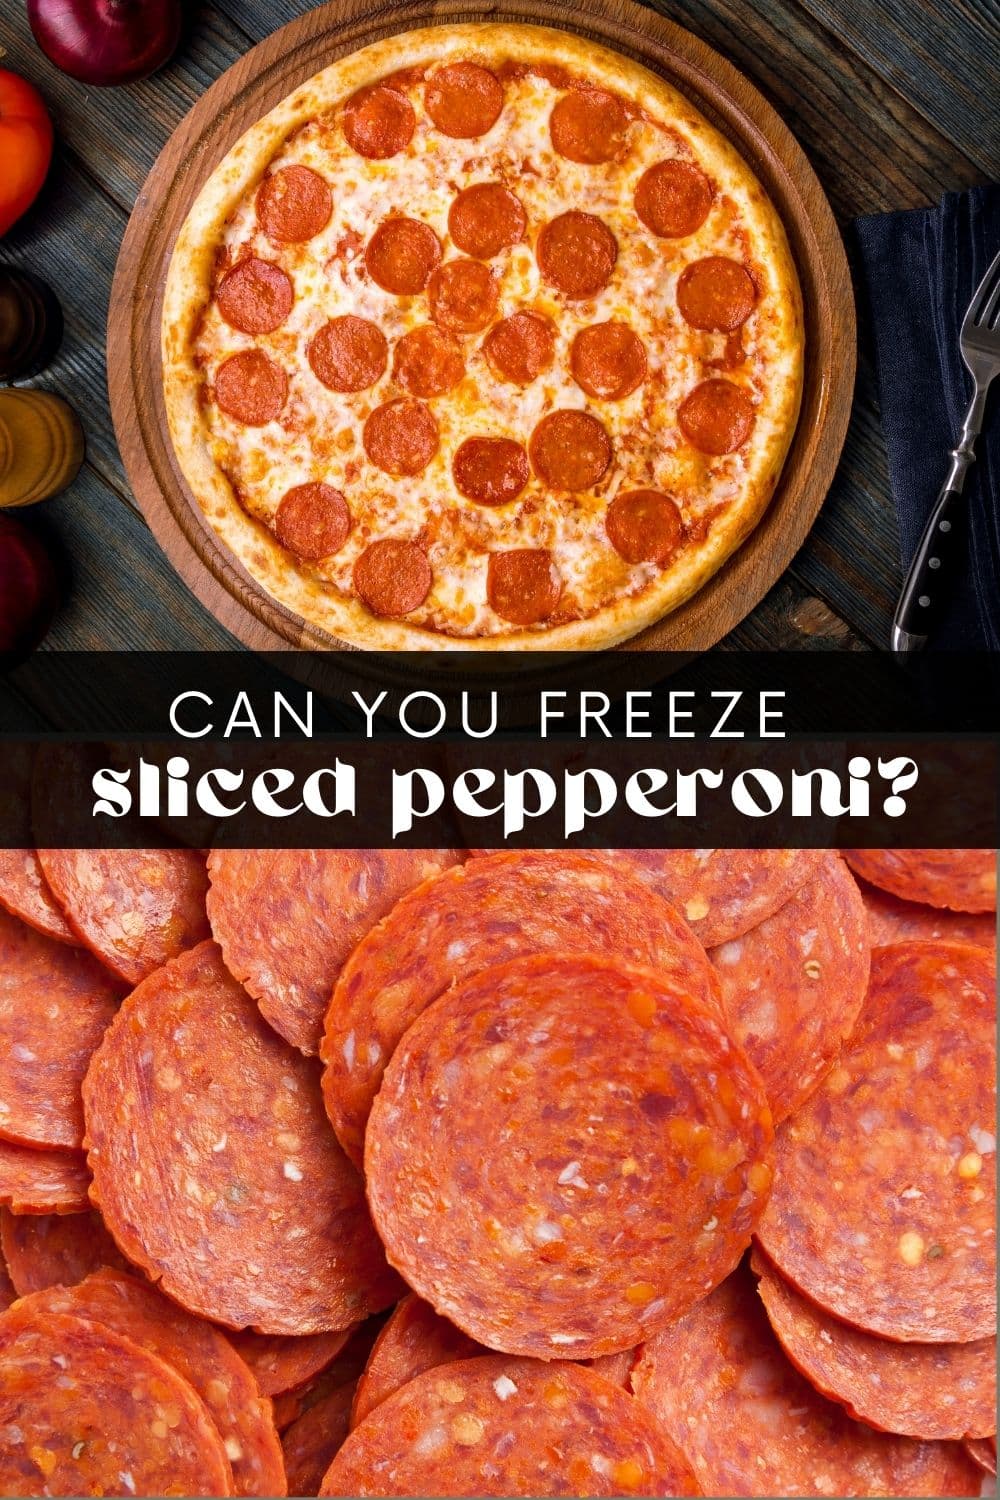 You might think cured meat like pepperoni can last for months in the fridge, but this isn't true. An opened packet of pepperoni will only last a week or two when stored correctly! We all know freezing food is a great way to make it last longer, but can you freeze pepperoni?